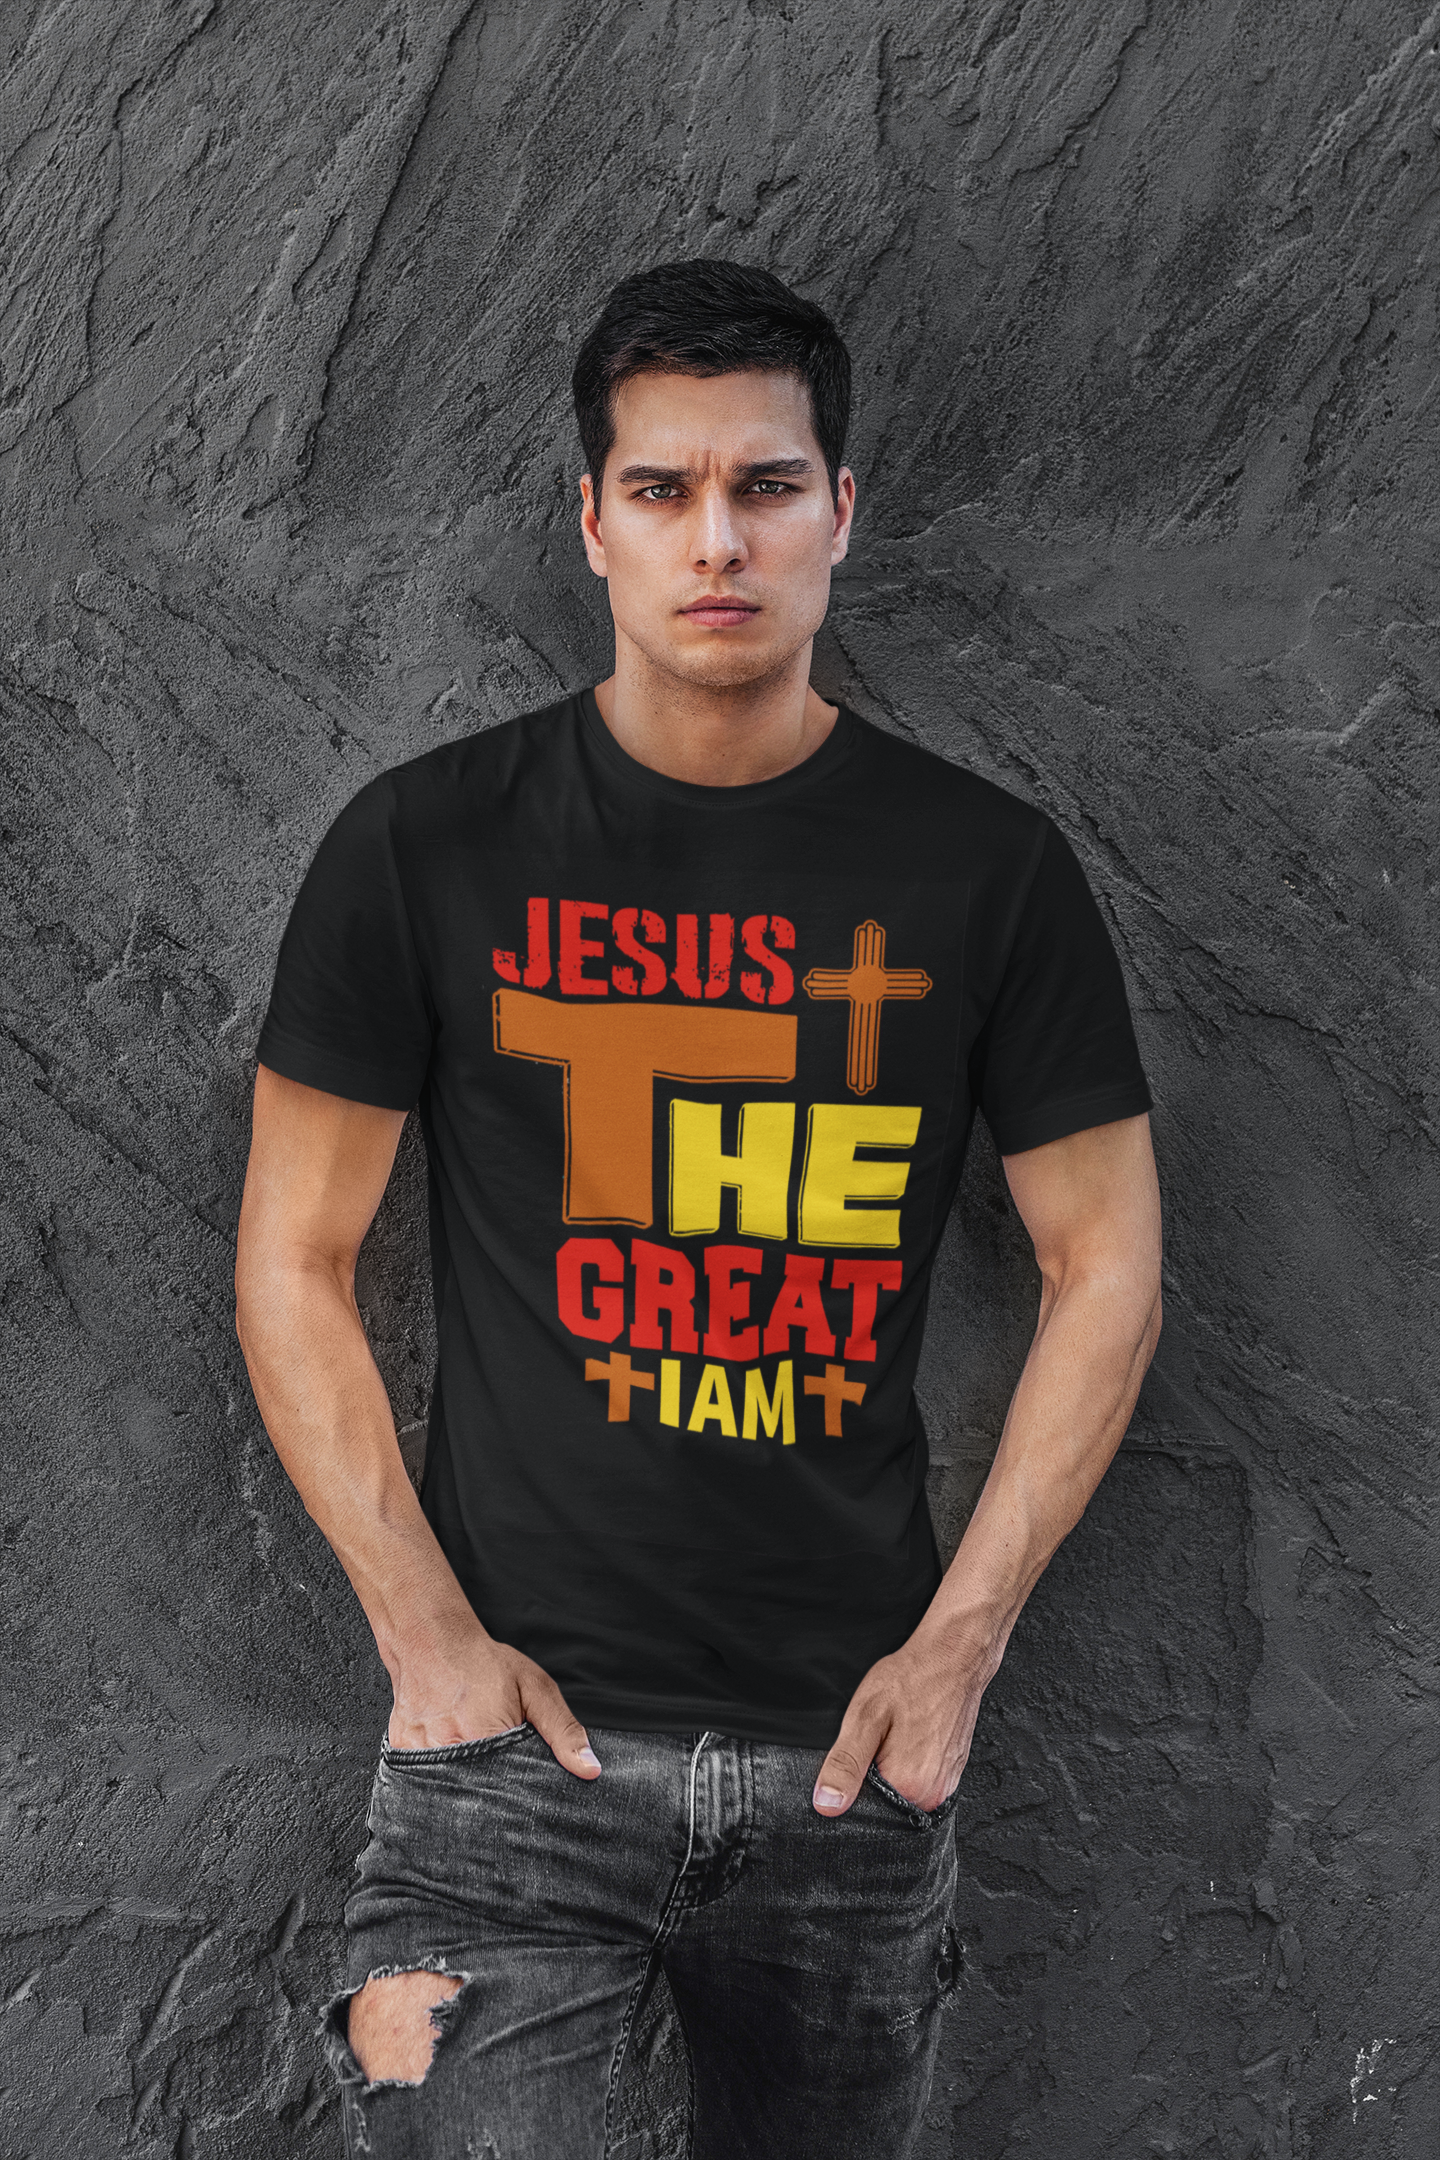 Jesus The Great I Am - T-Shirt